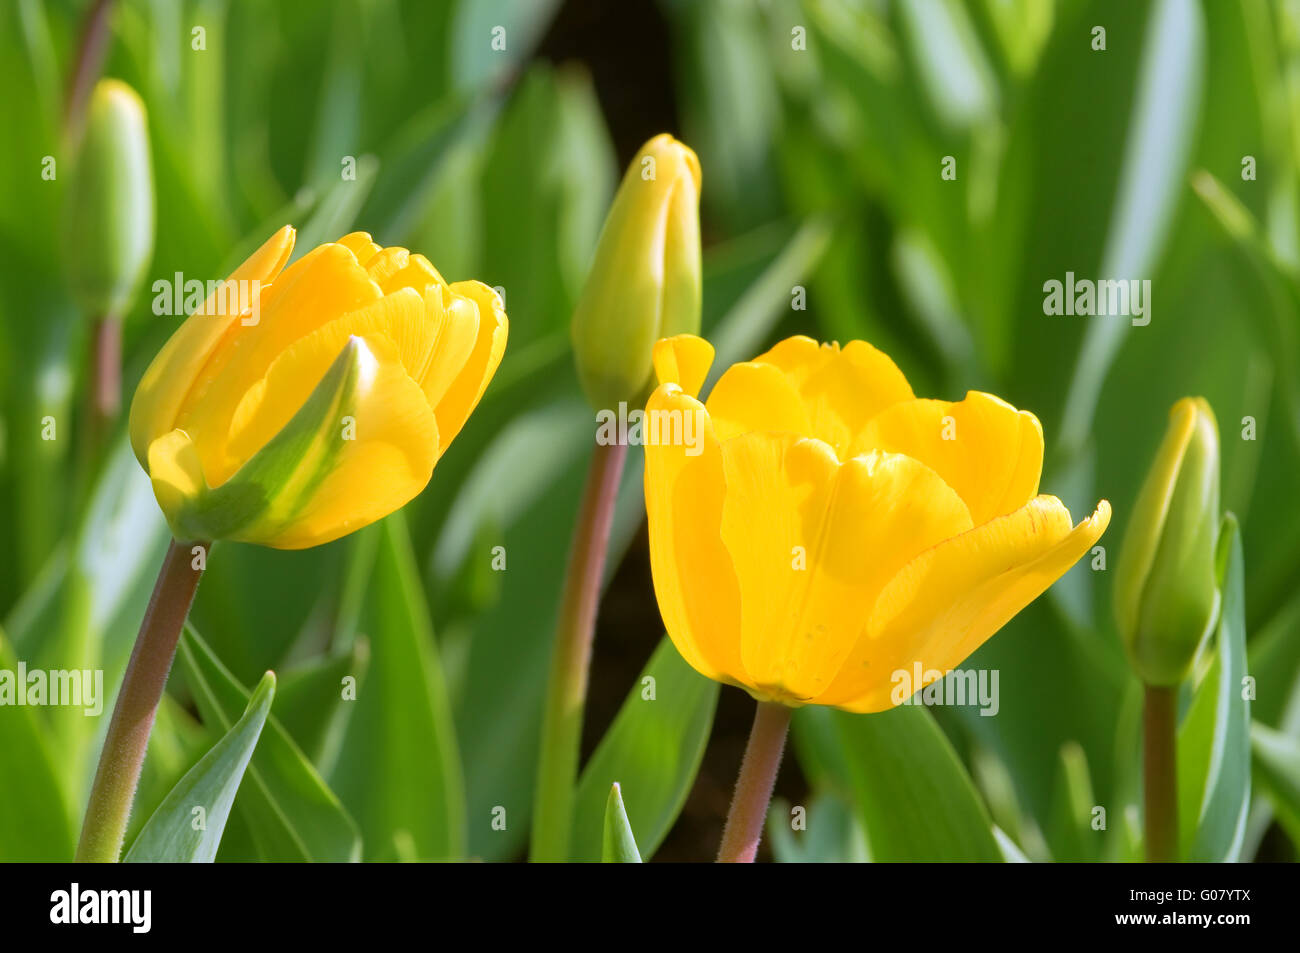 The close view of yellow tulips over green leafs Stock Photo